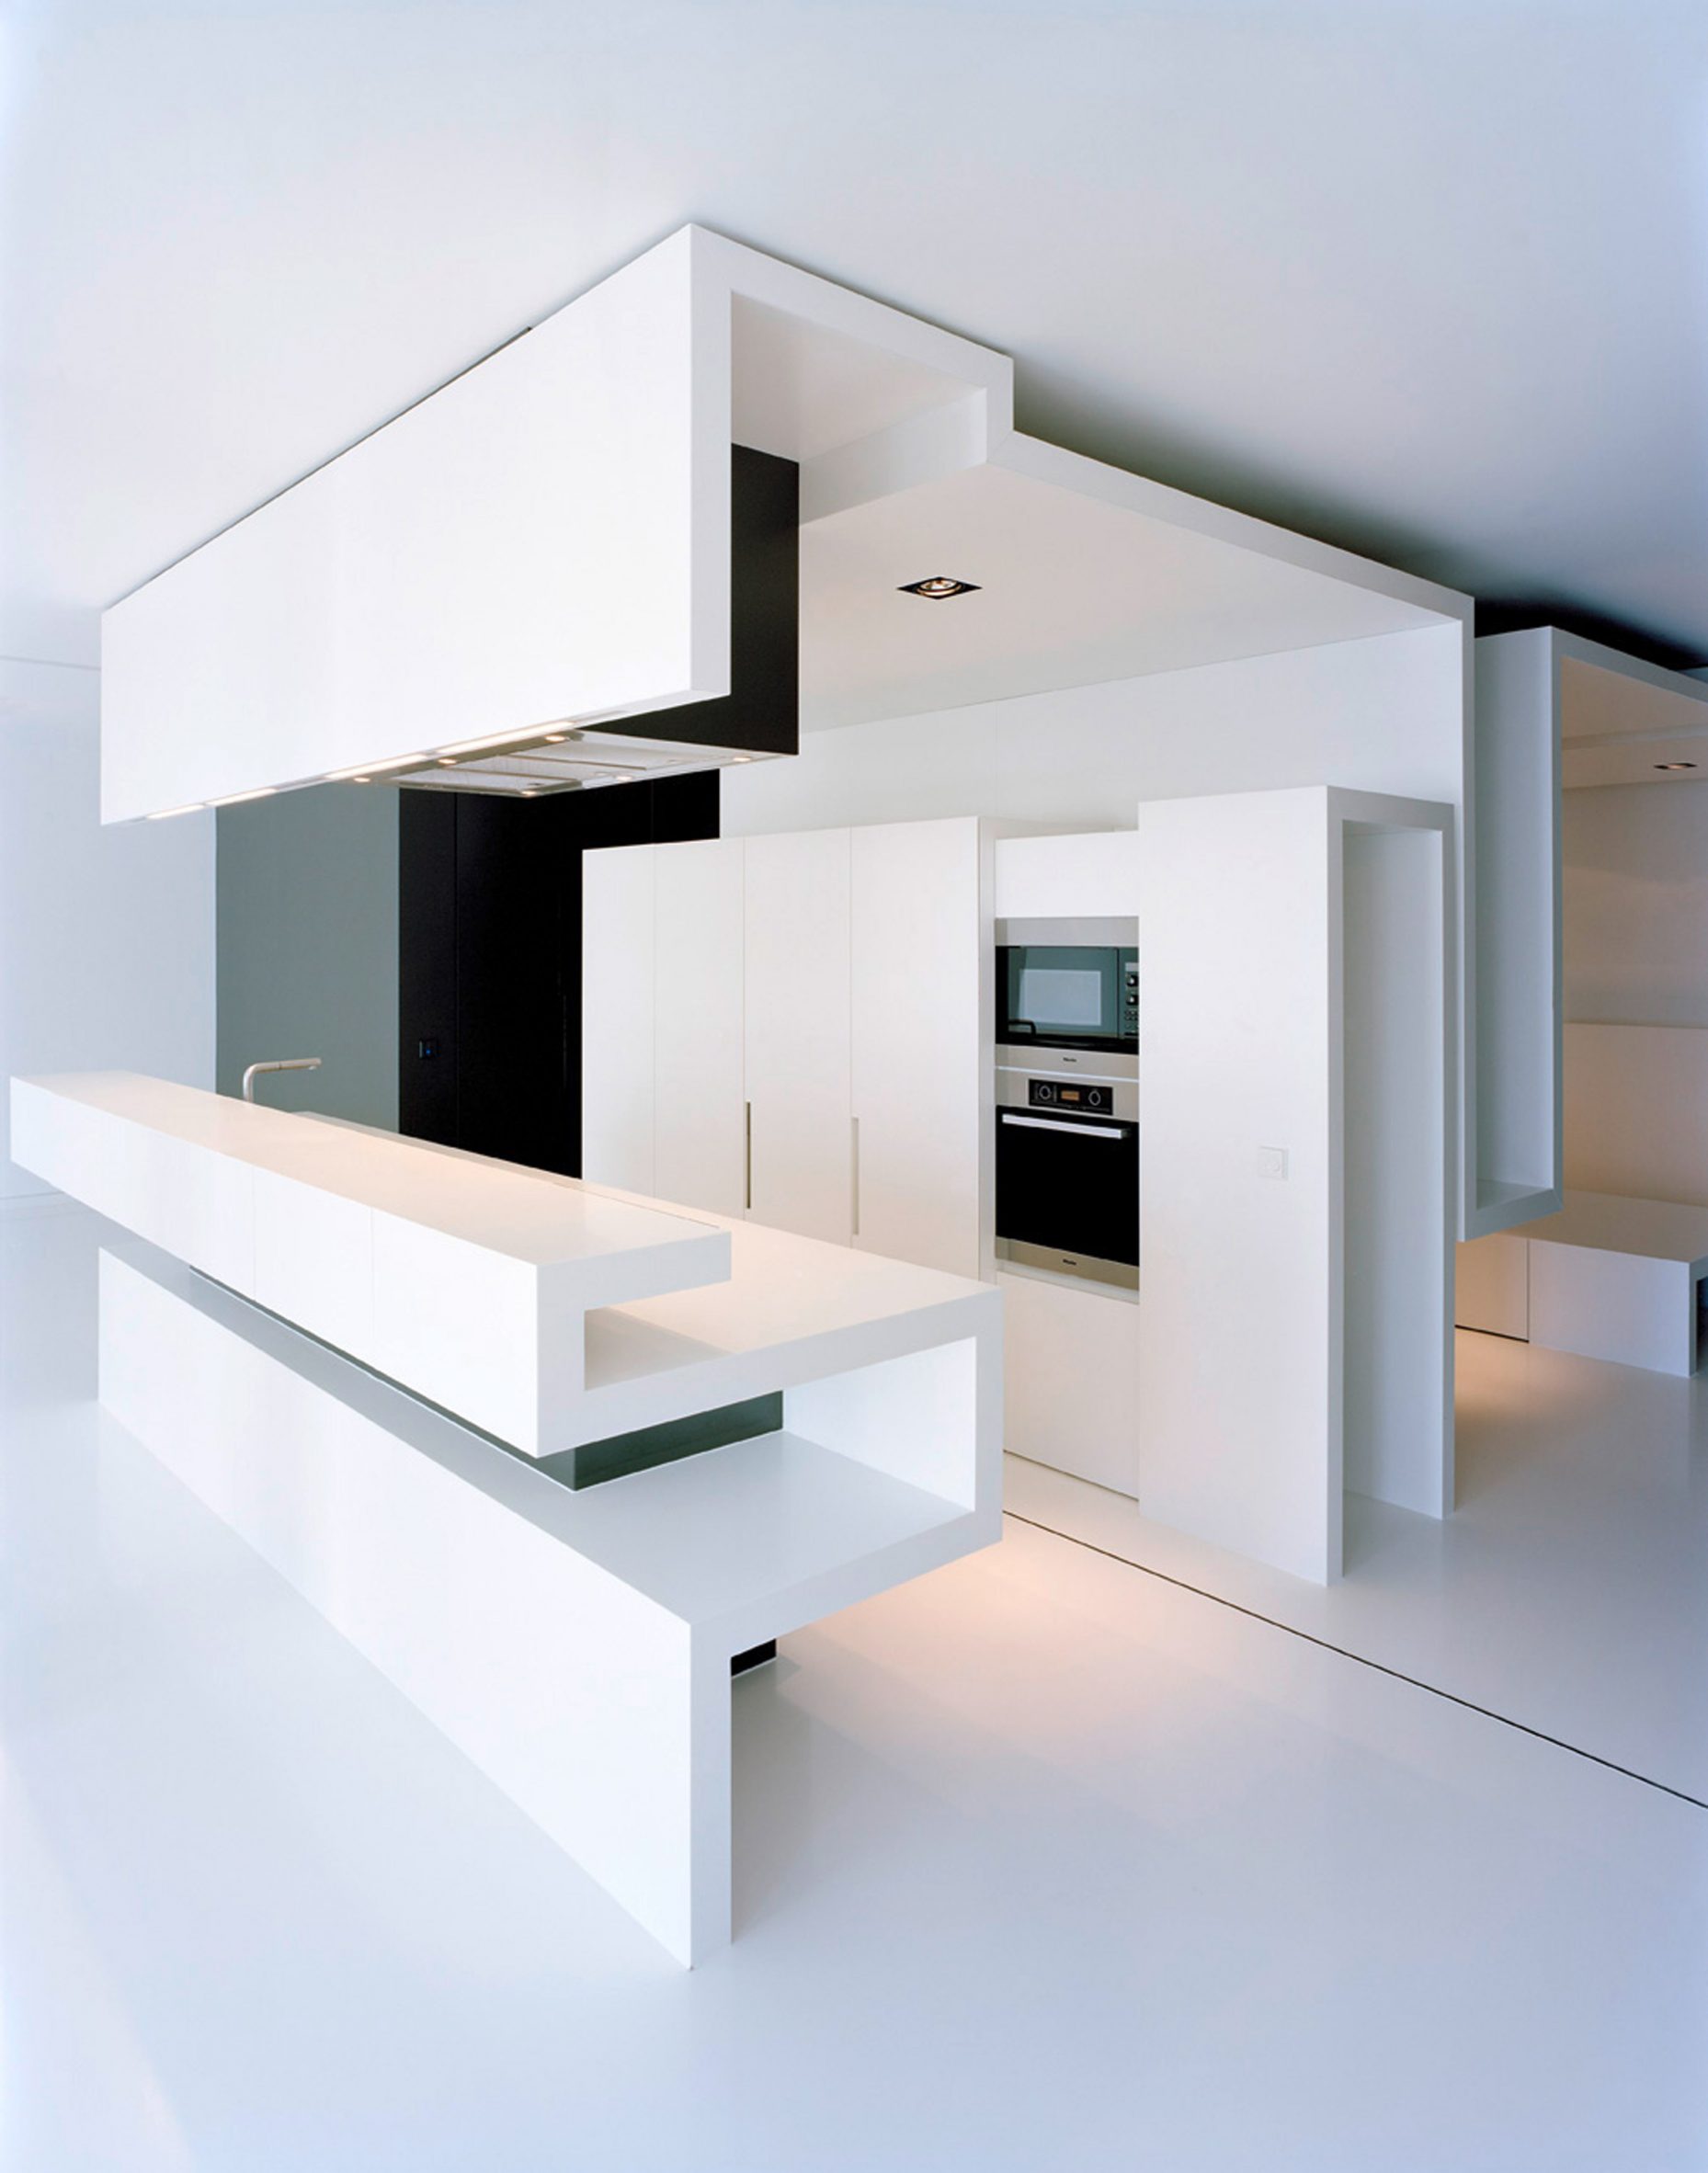 Corian Solid Surface range used across kitchen countertops in a Berlin apartment